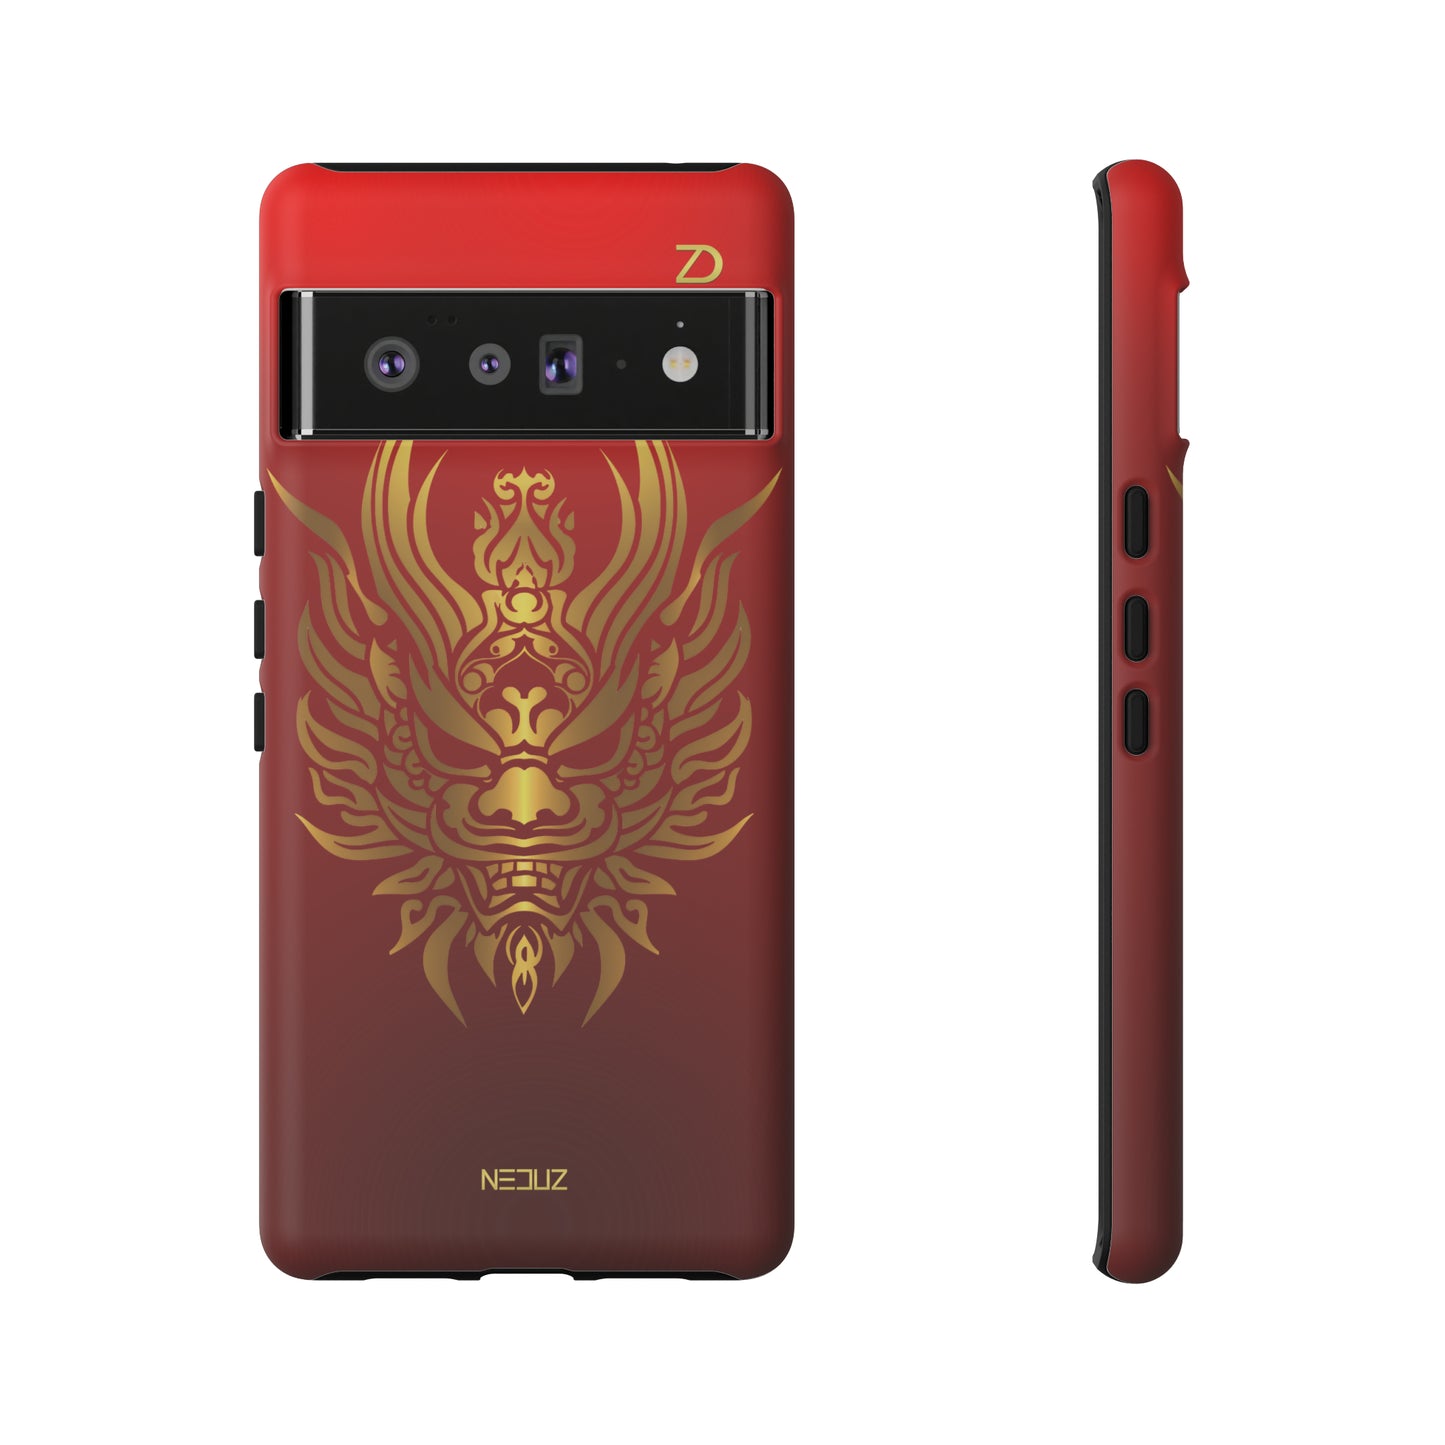 Neduz 龙 Lunar New Year Collection - Tough Cases with Chinese Dragon Design, Dual Layer Protection for Apple iPhone, Samsung Galaxy, Google Pixel